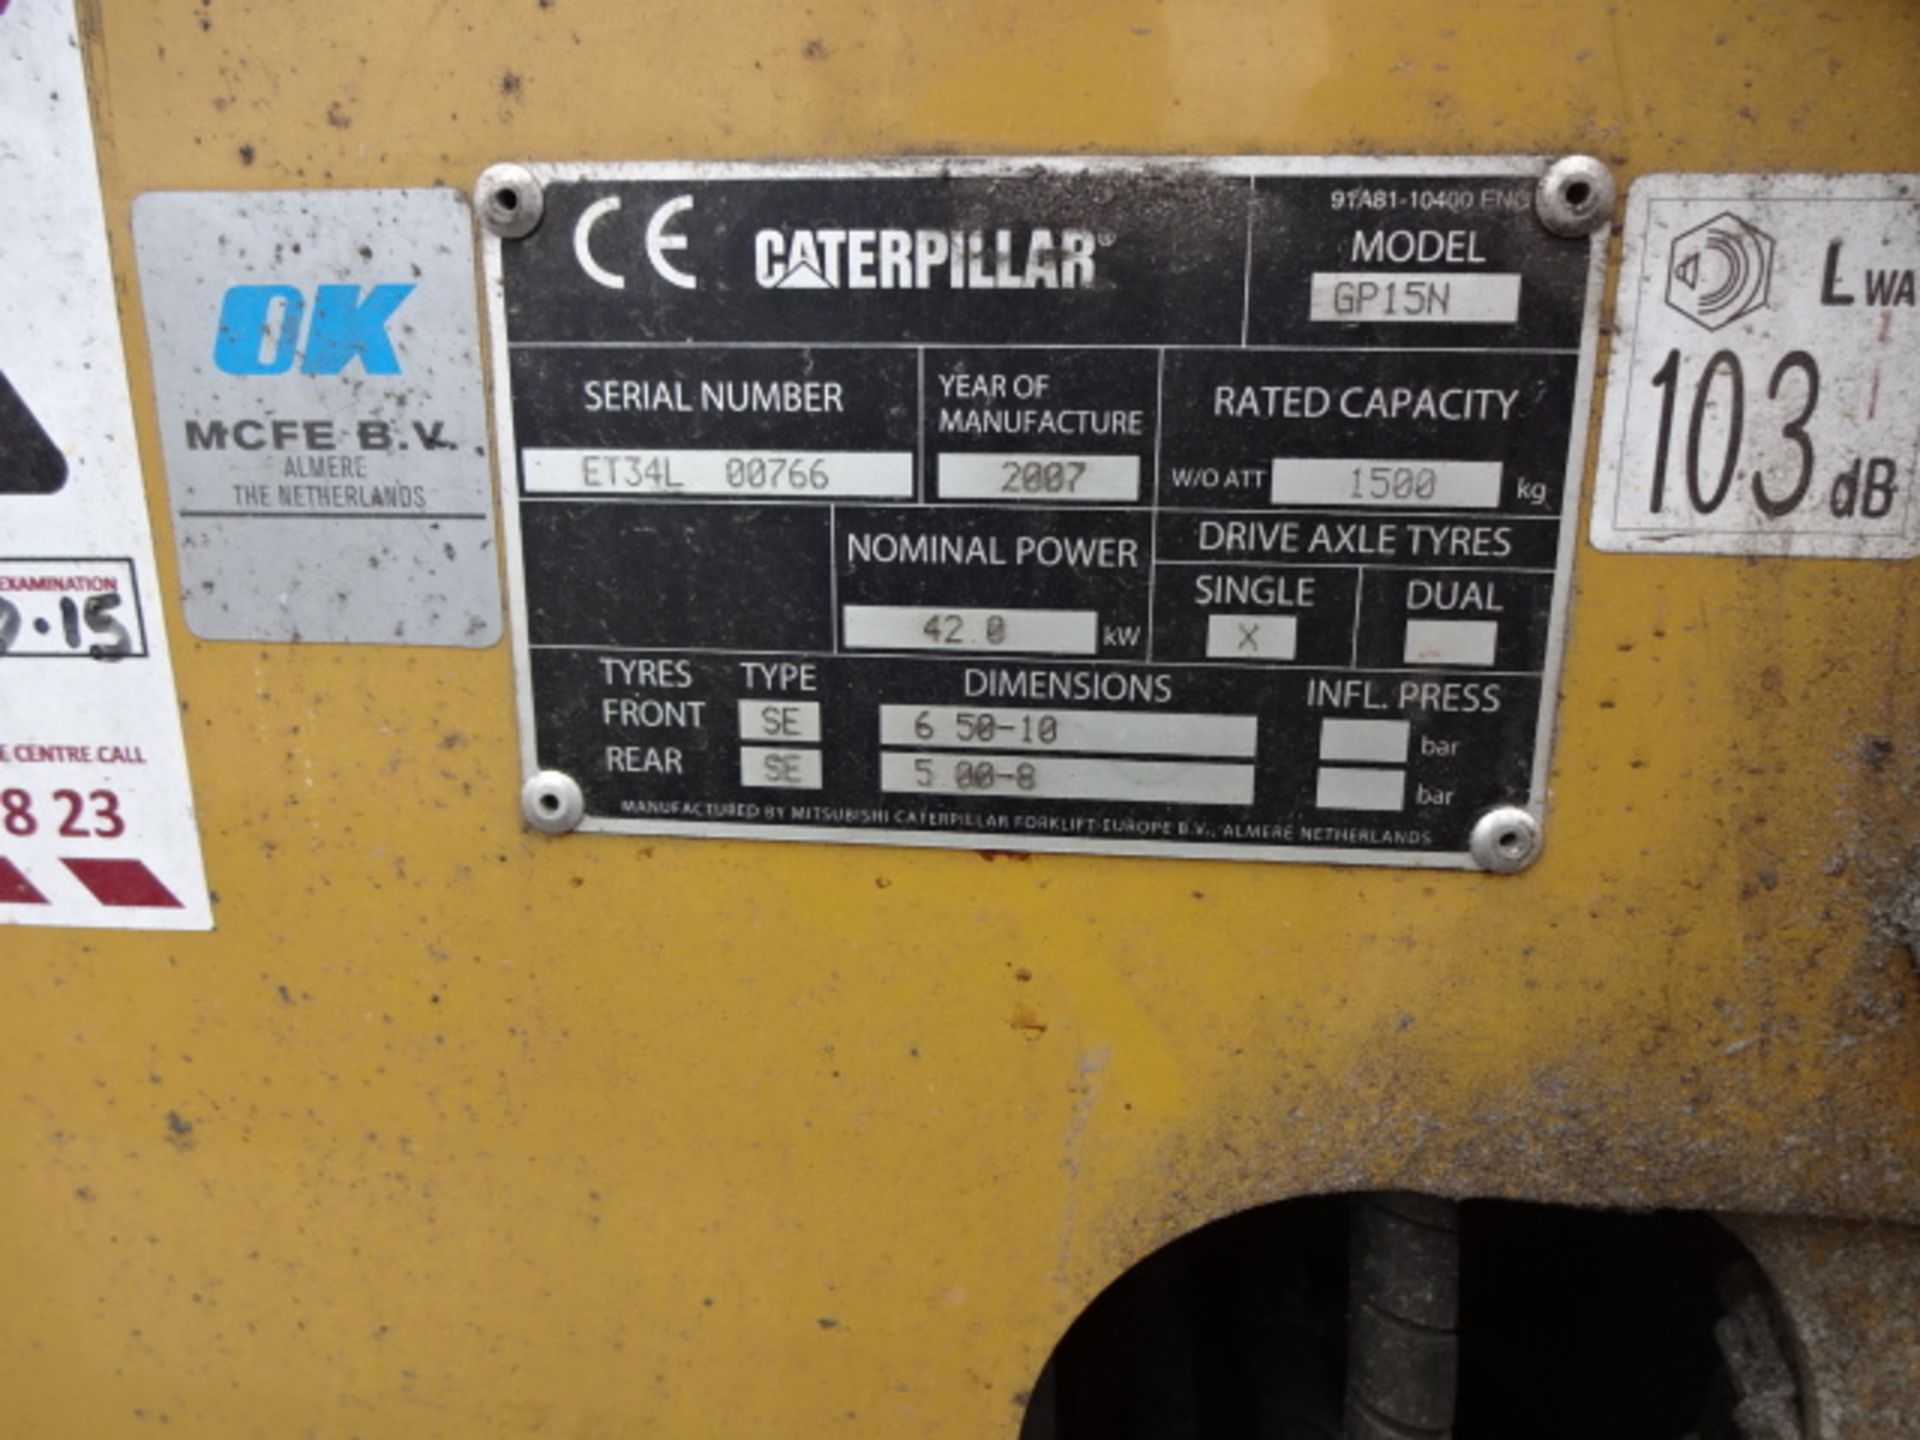 2007 CATERPILLAR GP15N 1.5t gas driven forklift truck S/n: ET34L00766 with duplex mast & side- - Image 3 of 10